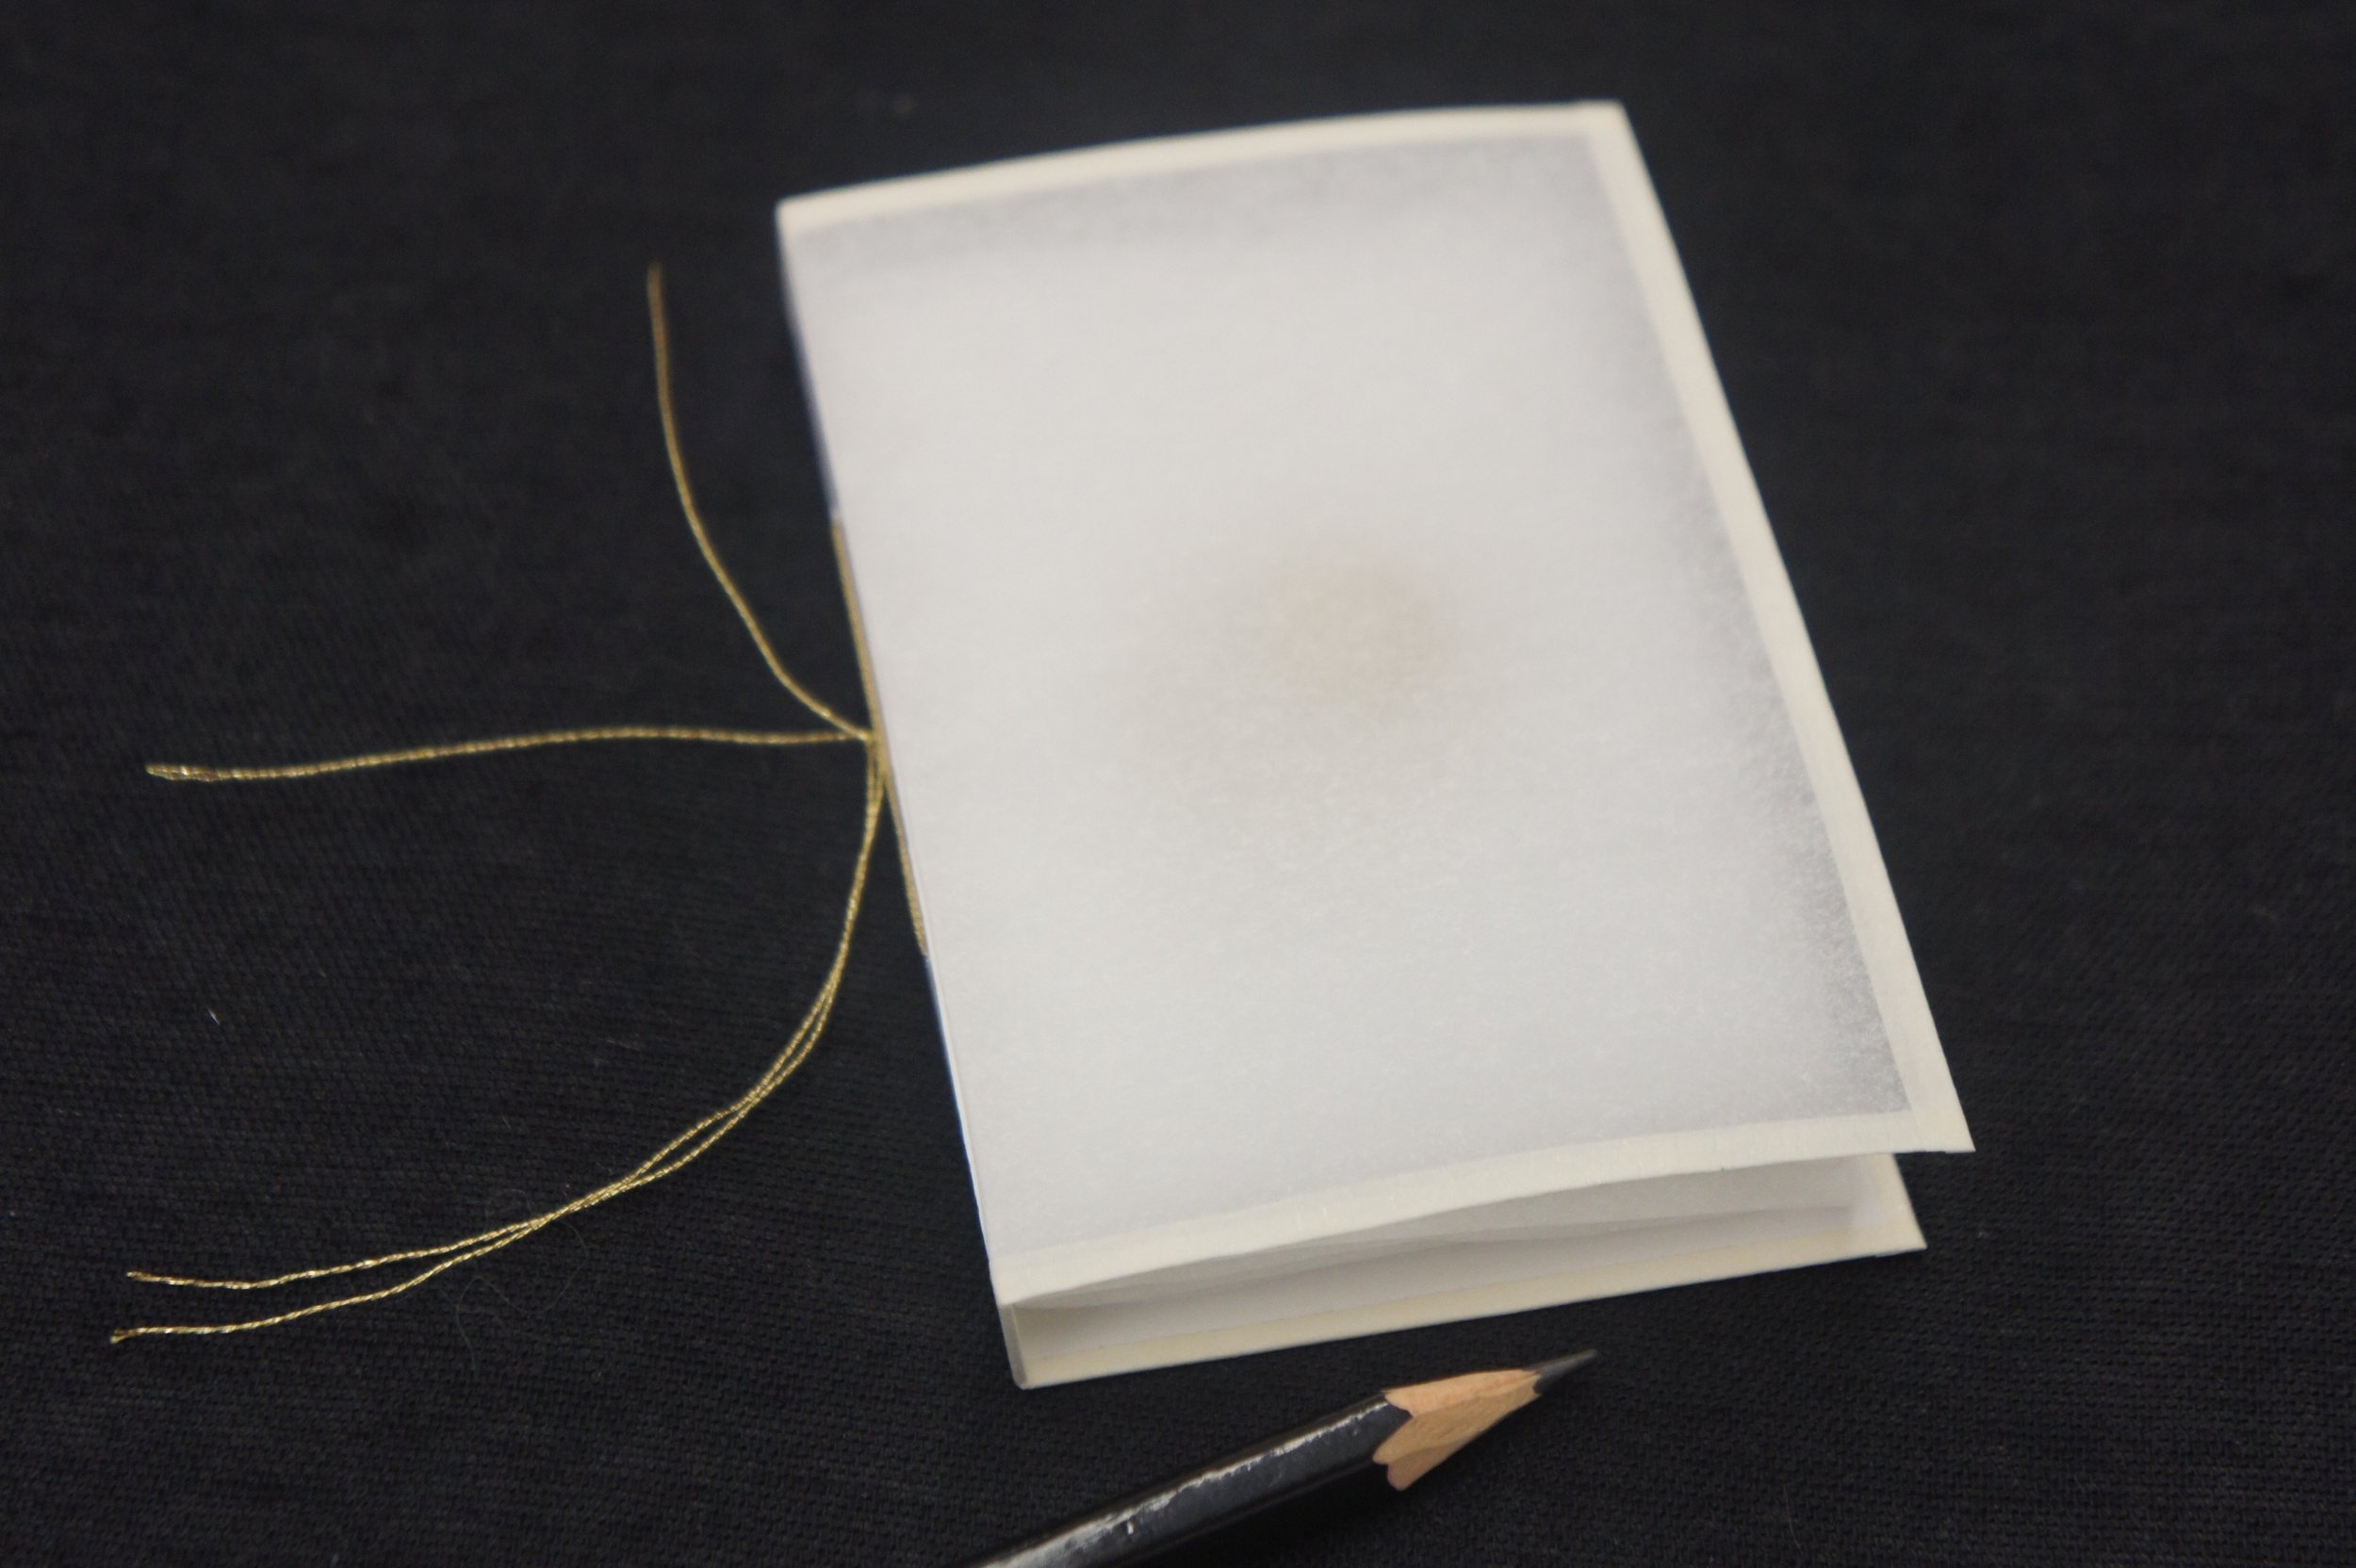 A small artist book made out of tracing paper and featuring microbeads